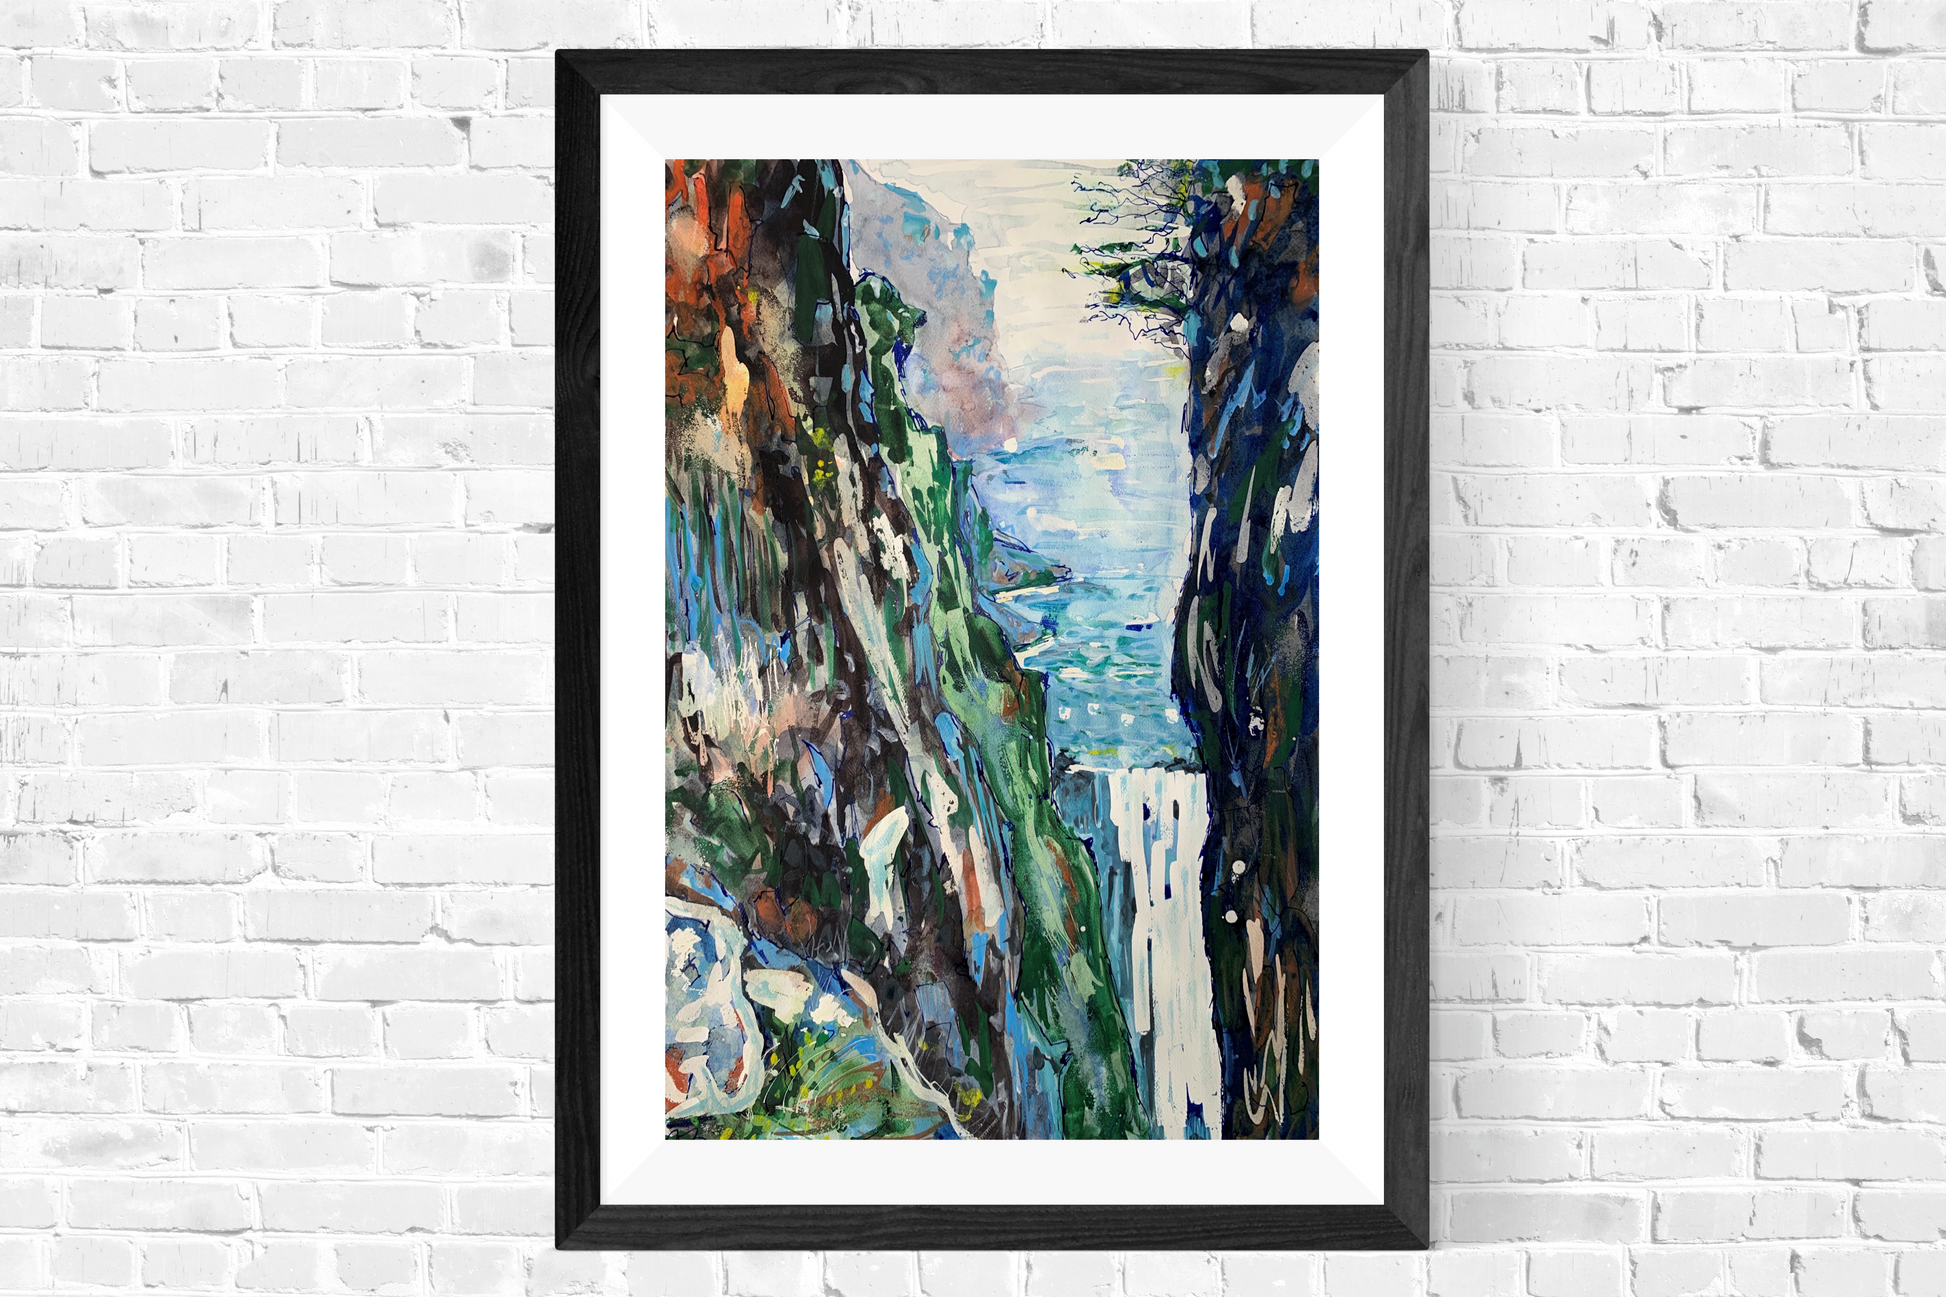 Symbolist landscape painting inspired by Joaquim Mir